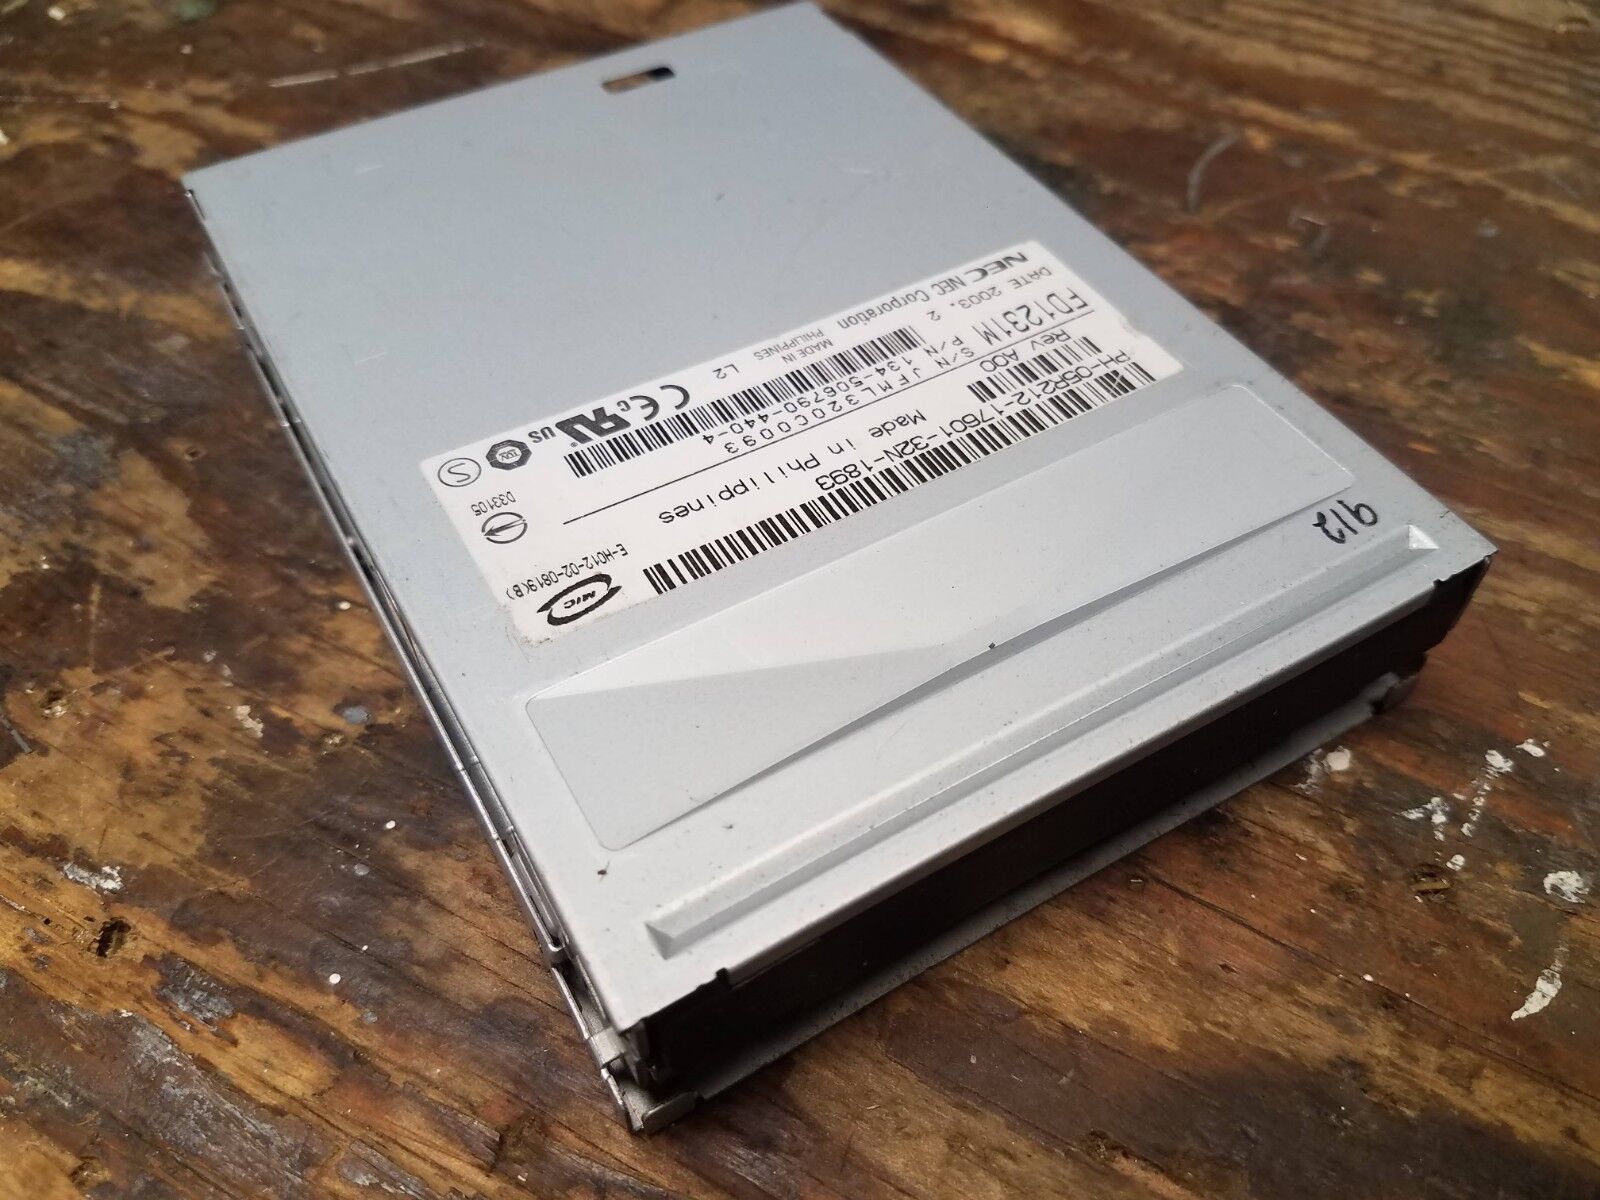 NEC Fd1231m 3.5 Inch Floppy Disk Drive Internal for PC - for sale 